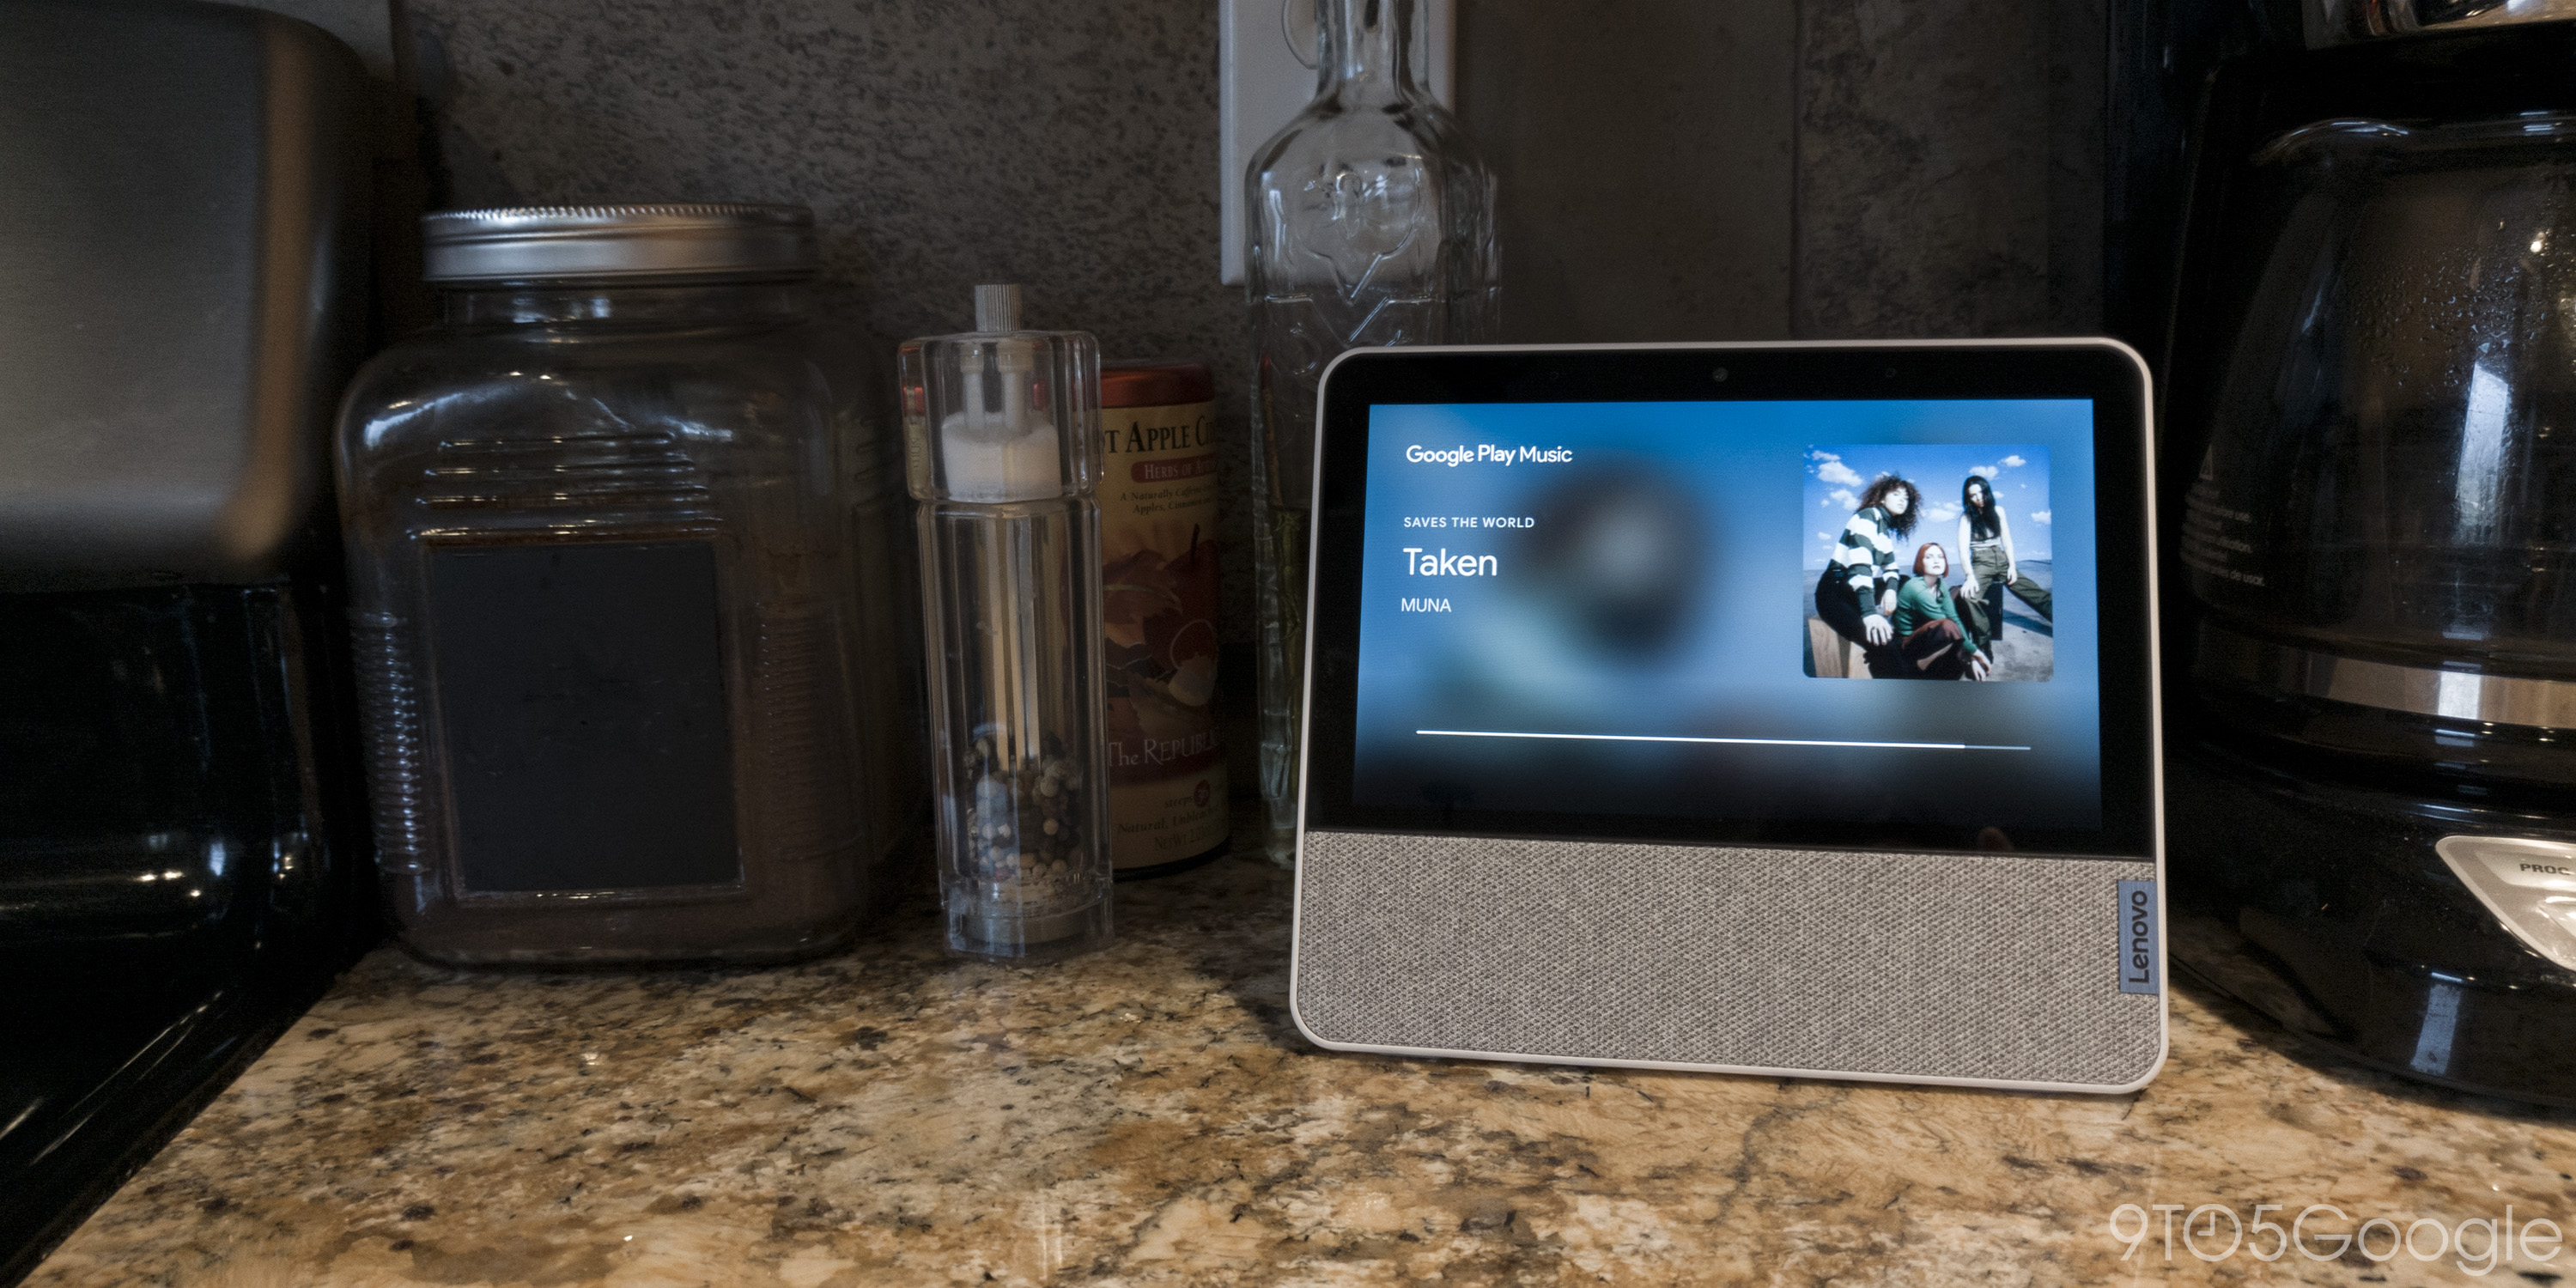 The Smart Display sitting on a kitchen countertop and playing the song "Taken" by MUNA.